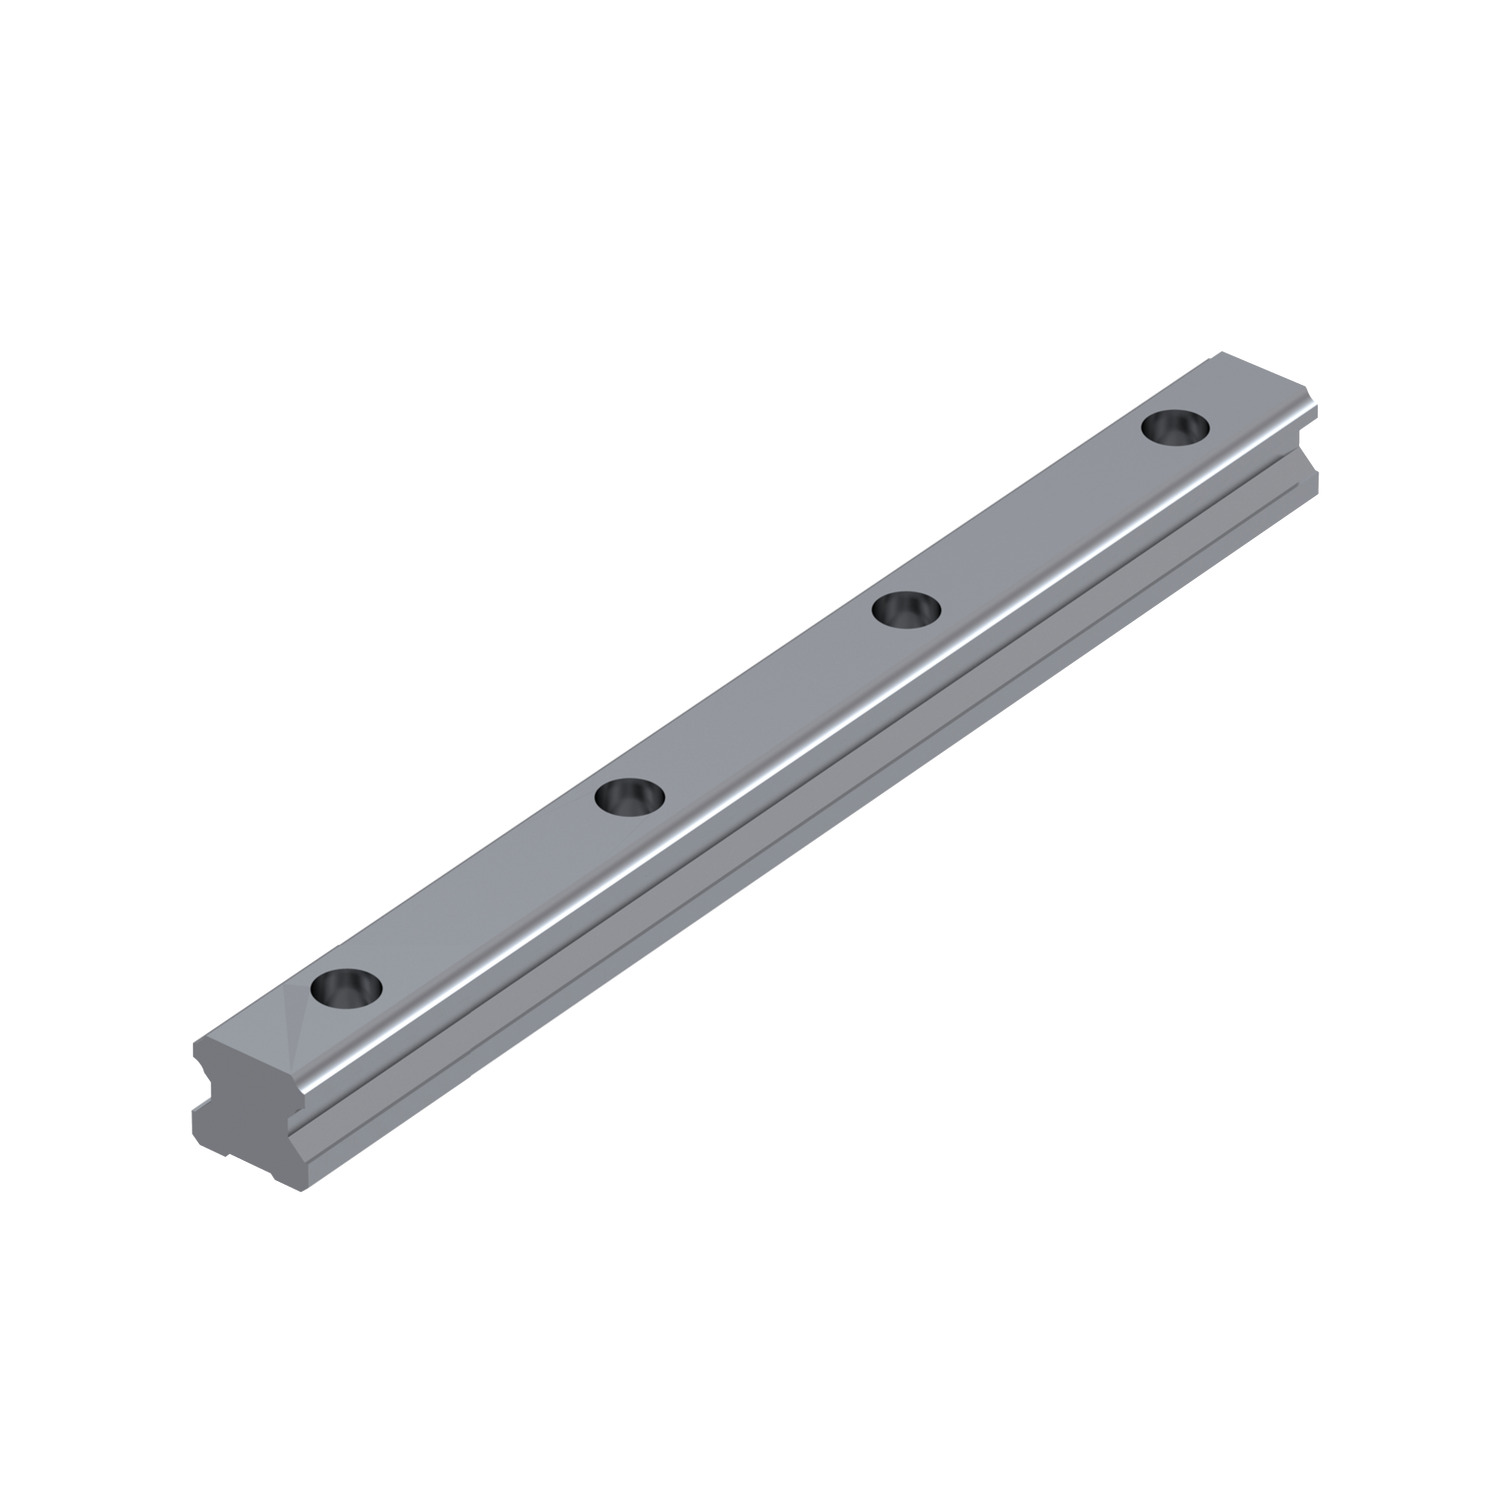 Linear Guideways Linear guideways, which can run alongside lead screws, can support very high loads and provide smooth linear motion. For more information, see our linear guideways page.